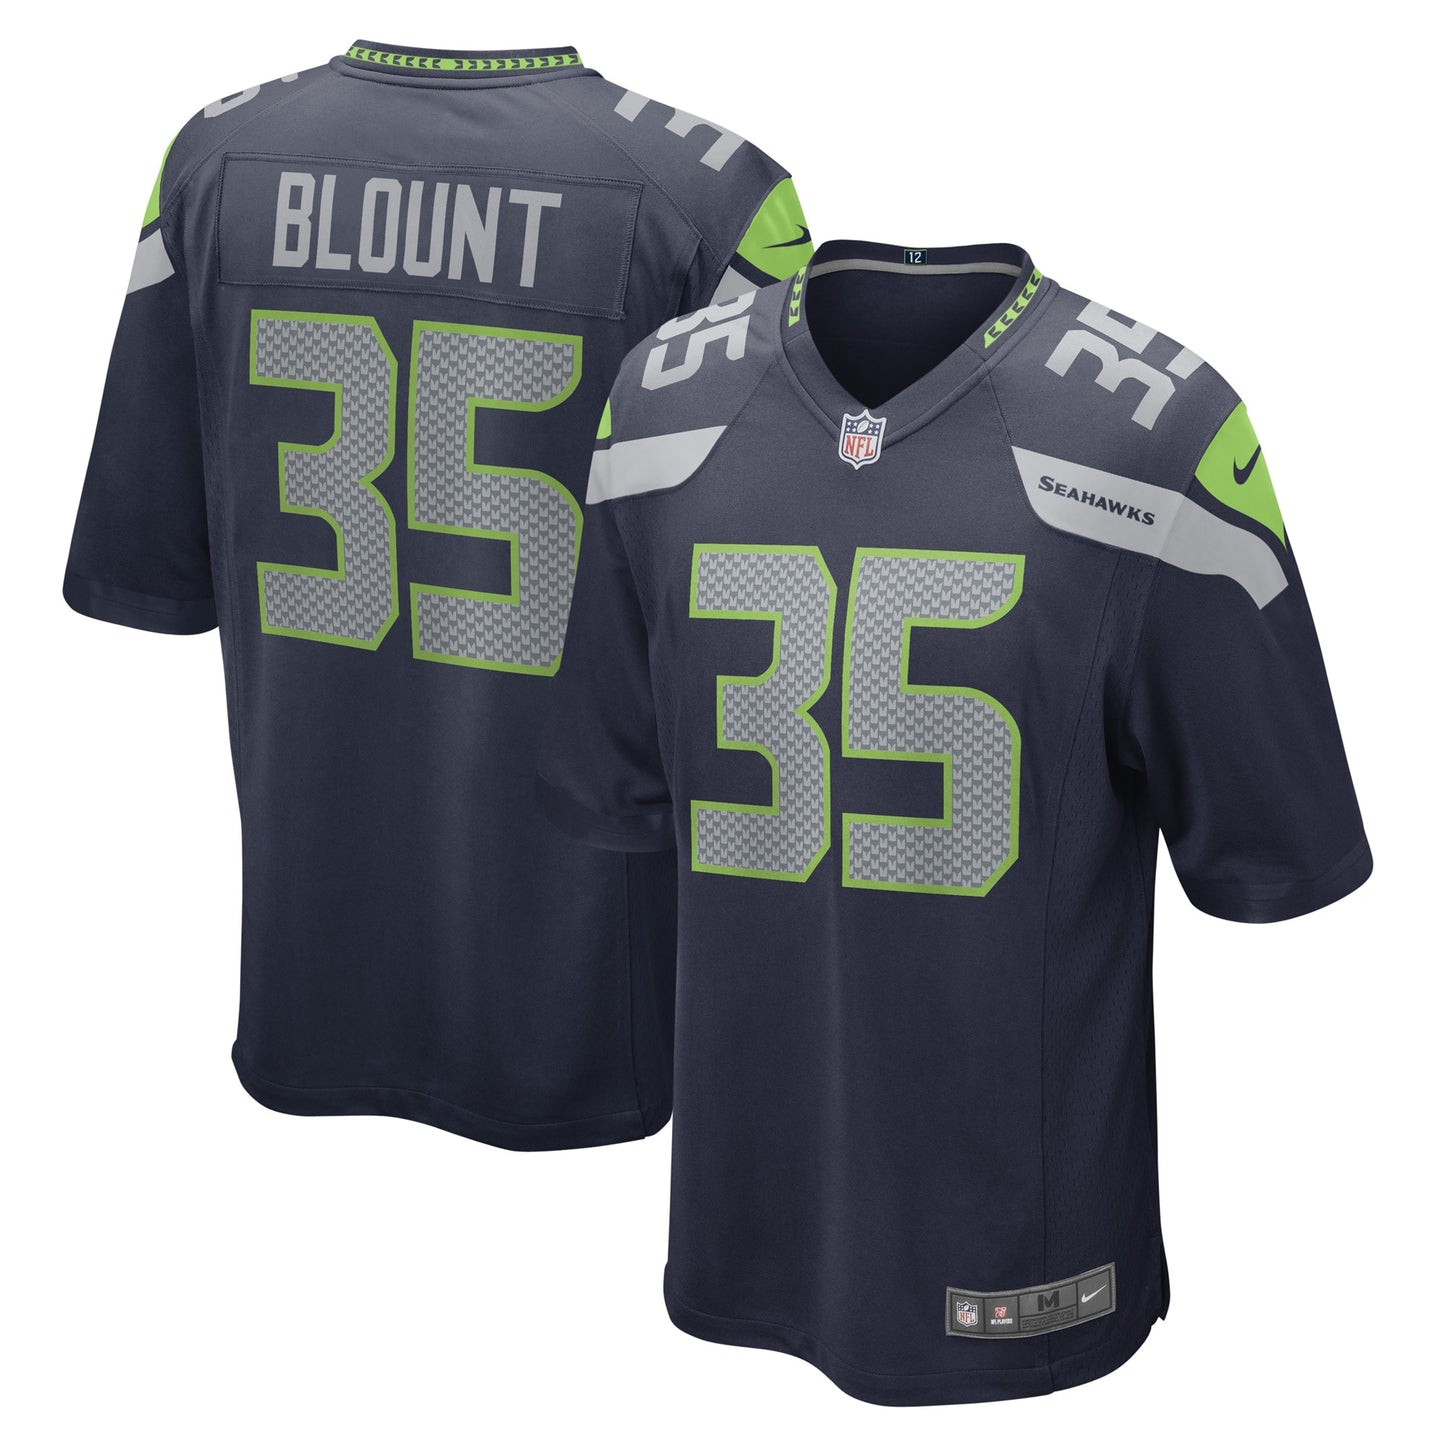 Joey Blount Seattle Seahawks Nike Game Player Jersey - College Navy